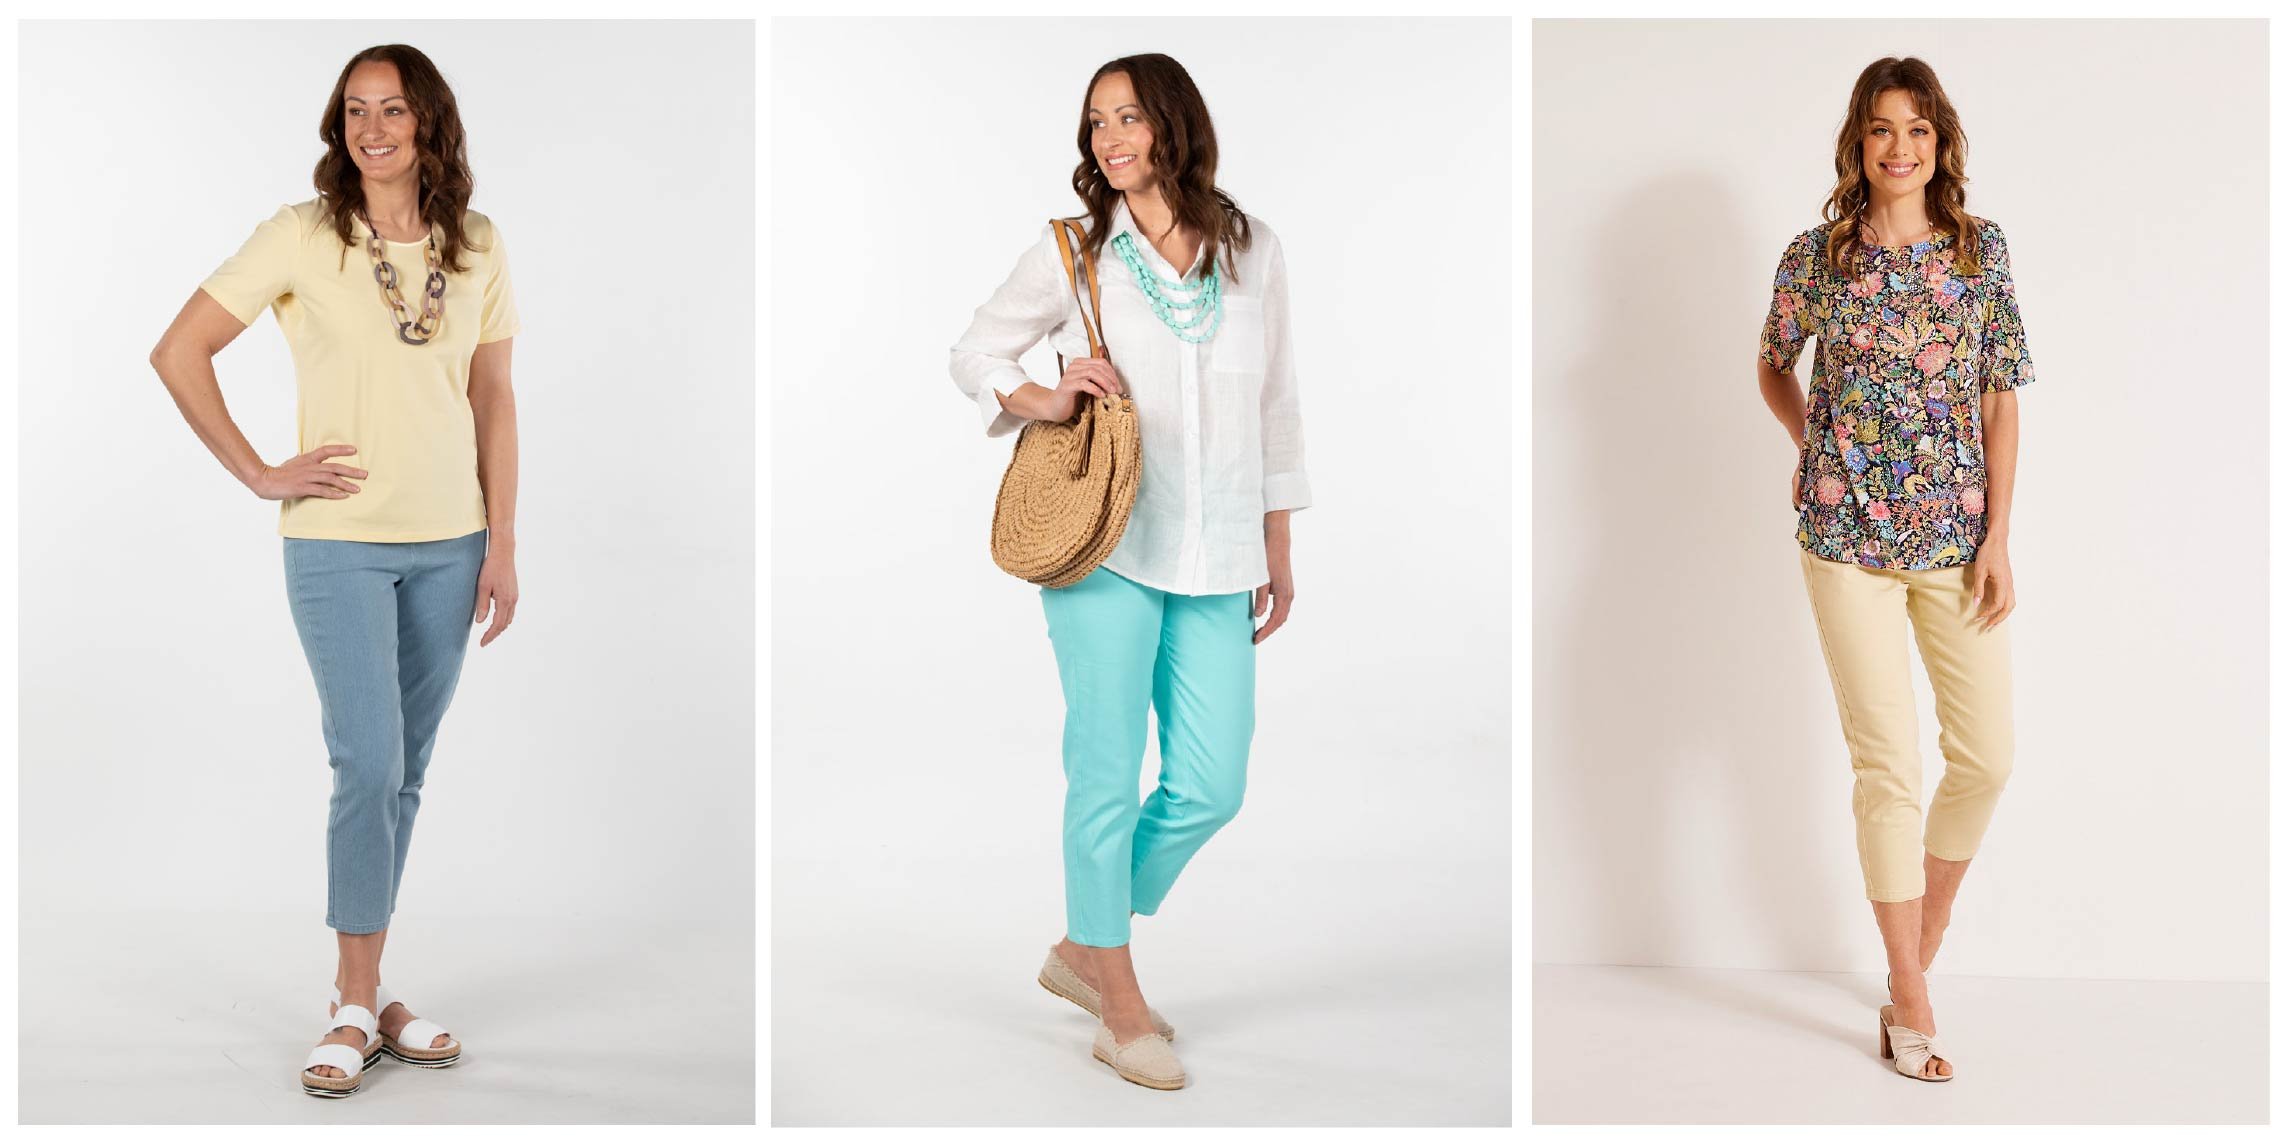 Women wearig Sandy Jeans in Chambray blue, Mint green and Butter yellow colours.